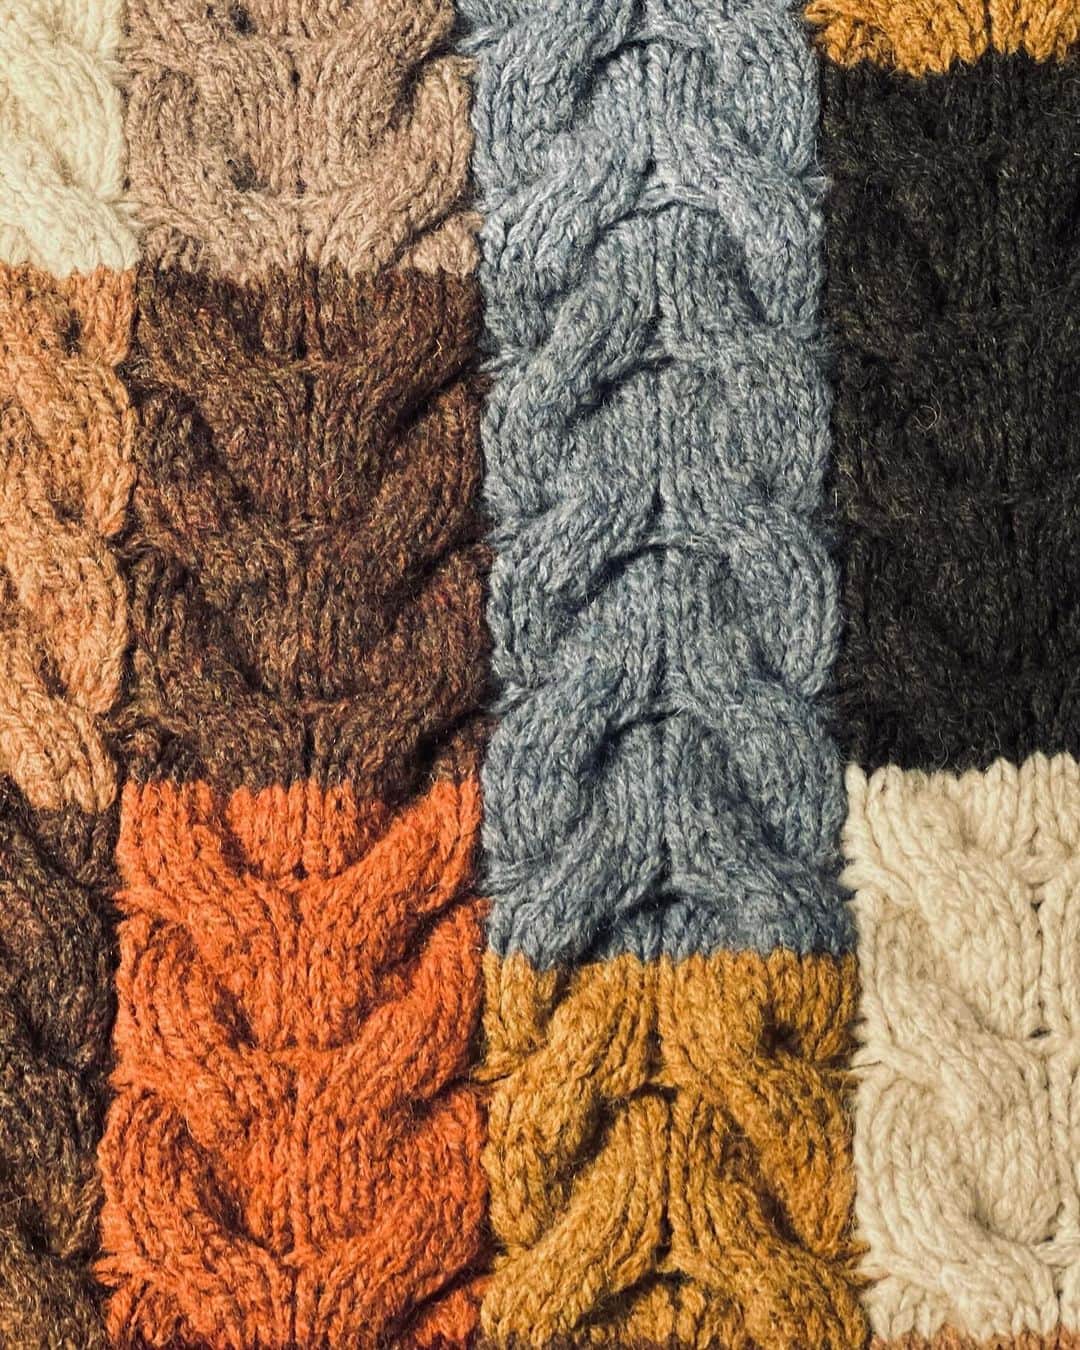 BEAMS+のインスタグラム：「・  BEAMS PLUS RECOMMEND  BEAMS PLUS  “Patchwork hand-knit”  The patchwork series has been a staple of BEAMS PLUS every season. This season, the cable knit is handmade, and the hand-knit fabric and texture are unique to hand-knitting.  -------------------------------------  BEAMS PLUS で毎シーズン定番になっているパッチワークシリーズ。 今シーズンはハンドメイドで仕立てられたケーブルニット、手編みならではの編み地と風合いをお楽しみください。   #beams #beamsplus #beamsplusharajuku  #mensfashion #handknitsweater」